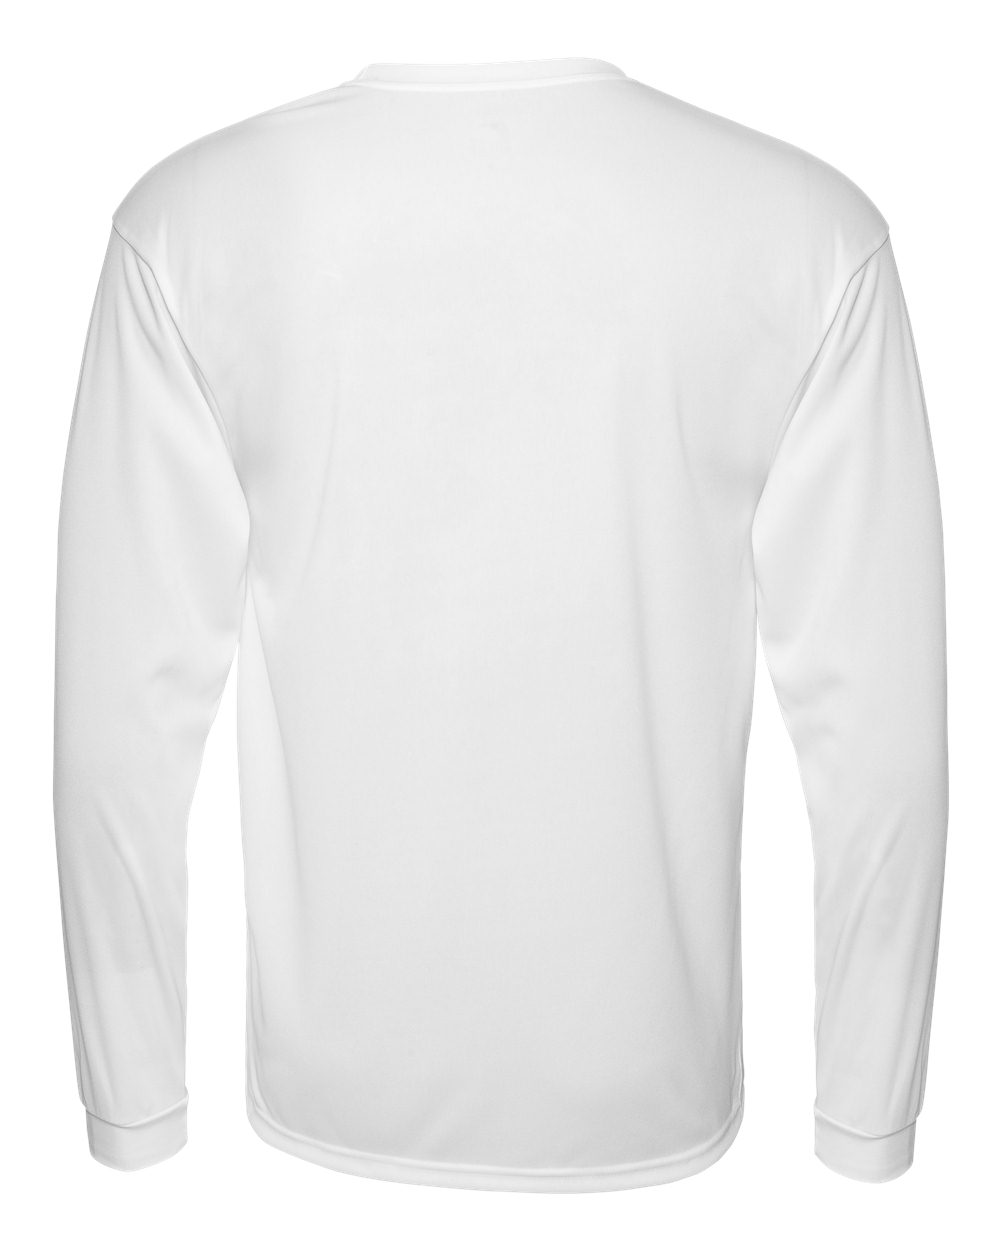 C2 Sport Mens Long Sleeve T Shirt Polyester 5104 up to 3XL | eBay